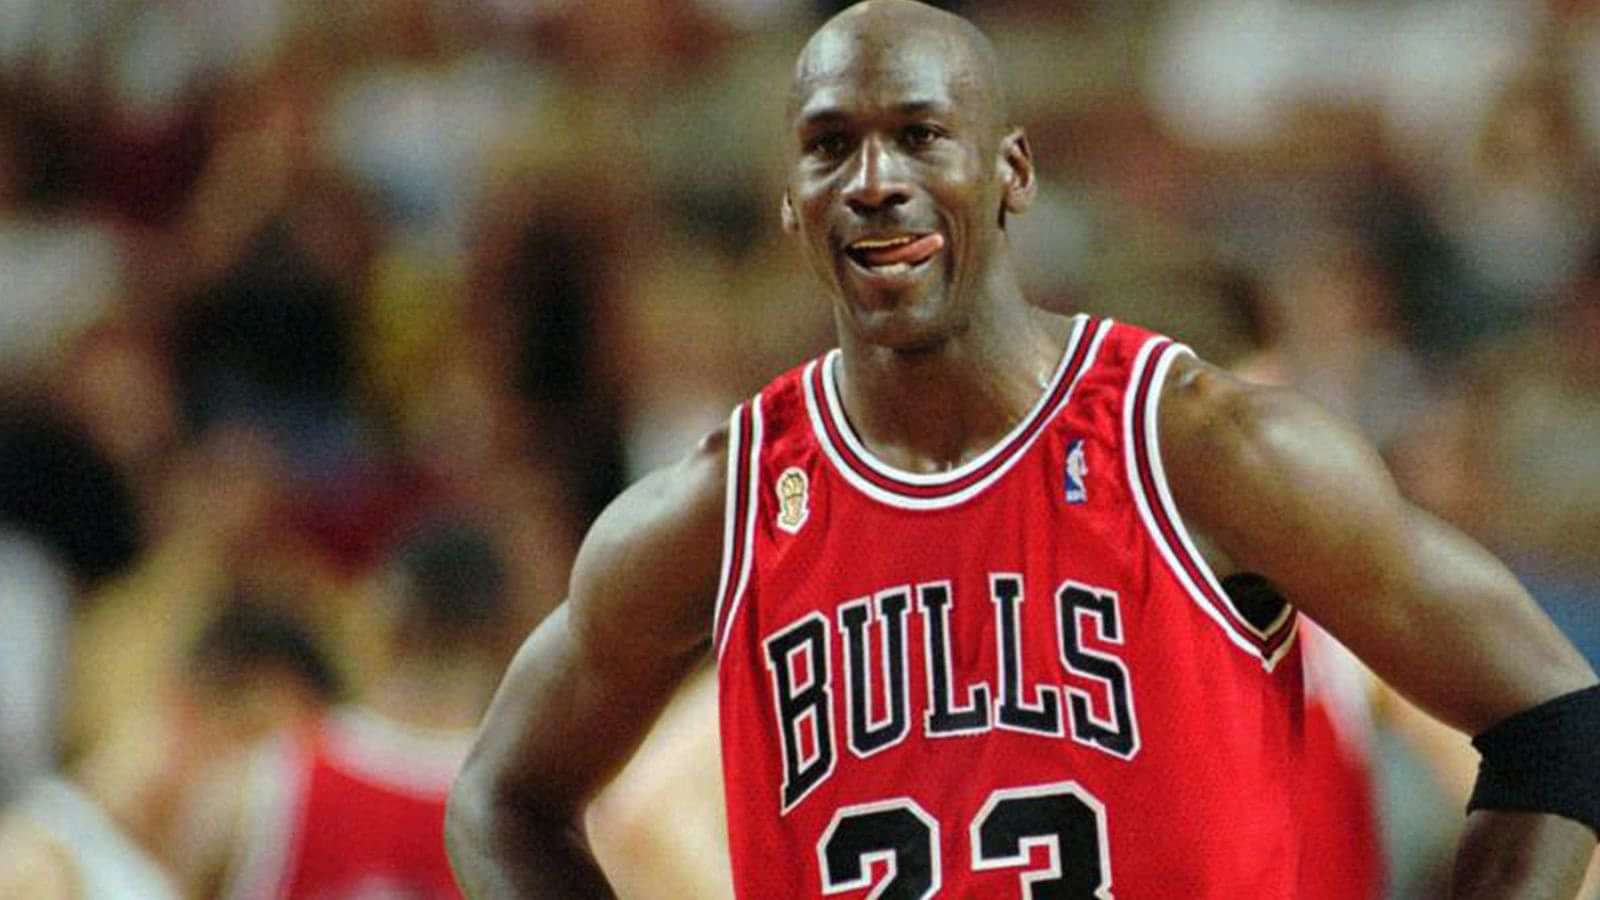 Michael Jordan's $33.1 million contract in 97-98 stayed the salary in NBA until 2018 - The SportsRush